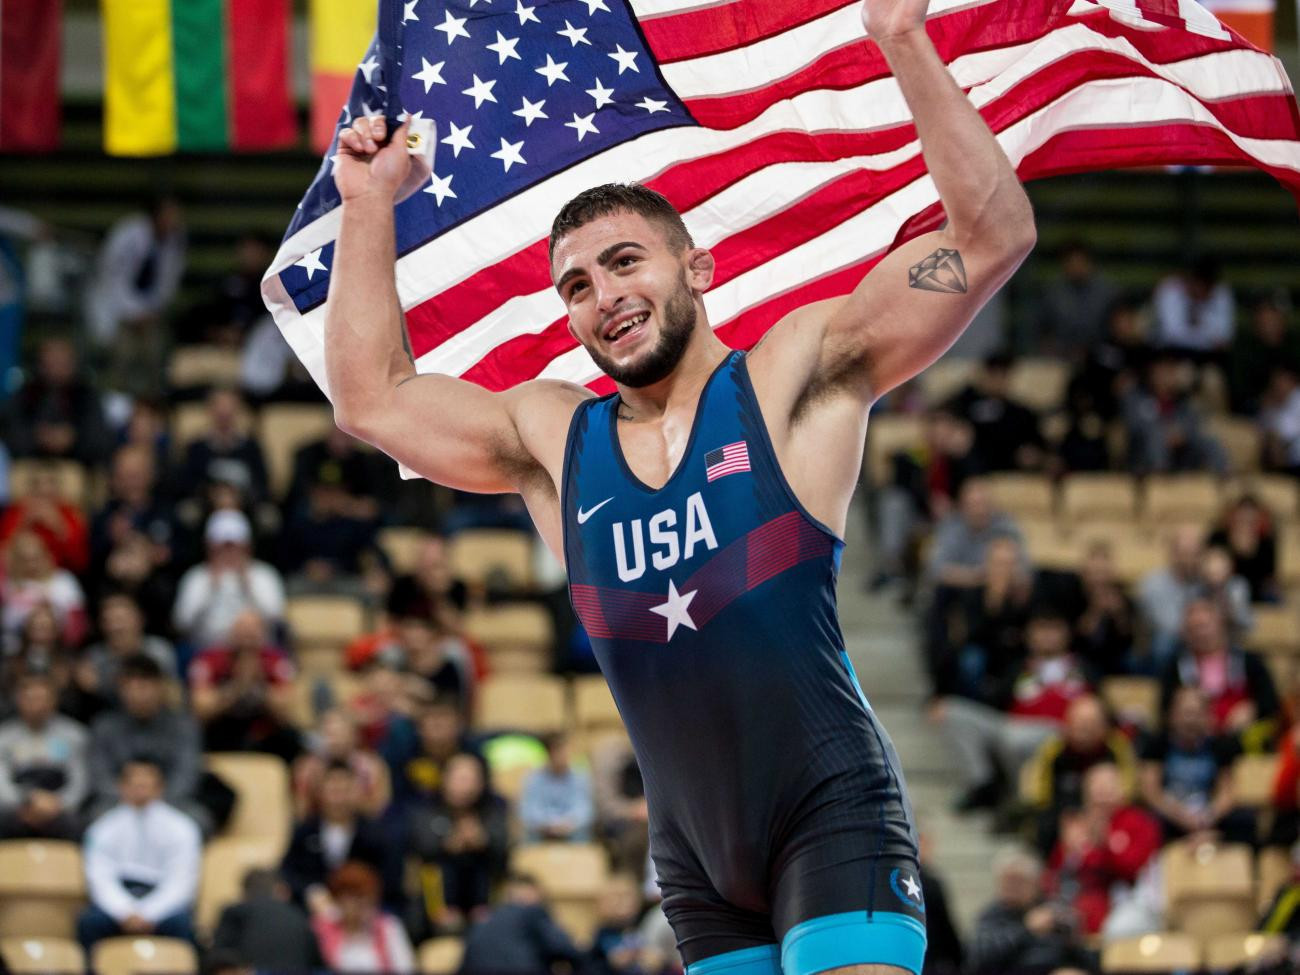 Richard Lewis won the United States' first and only gold medal of the event with victory in the 70kg category ©UWW